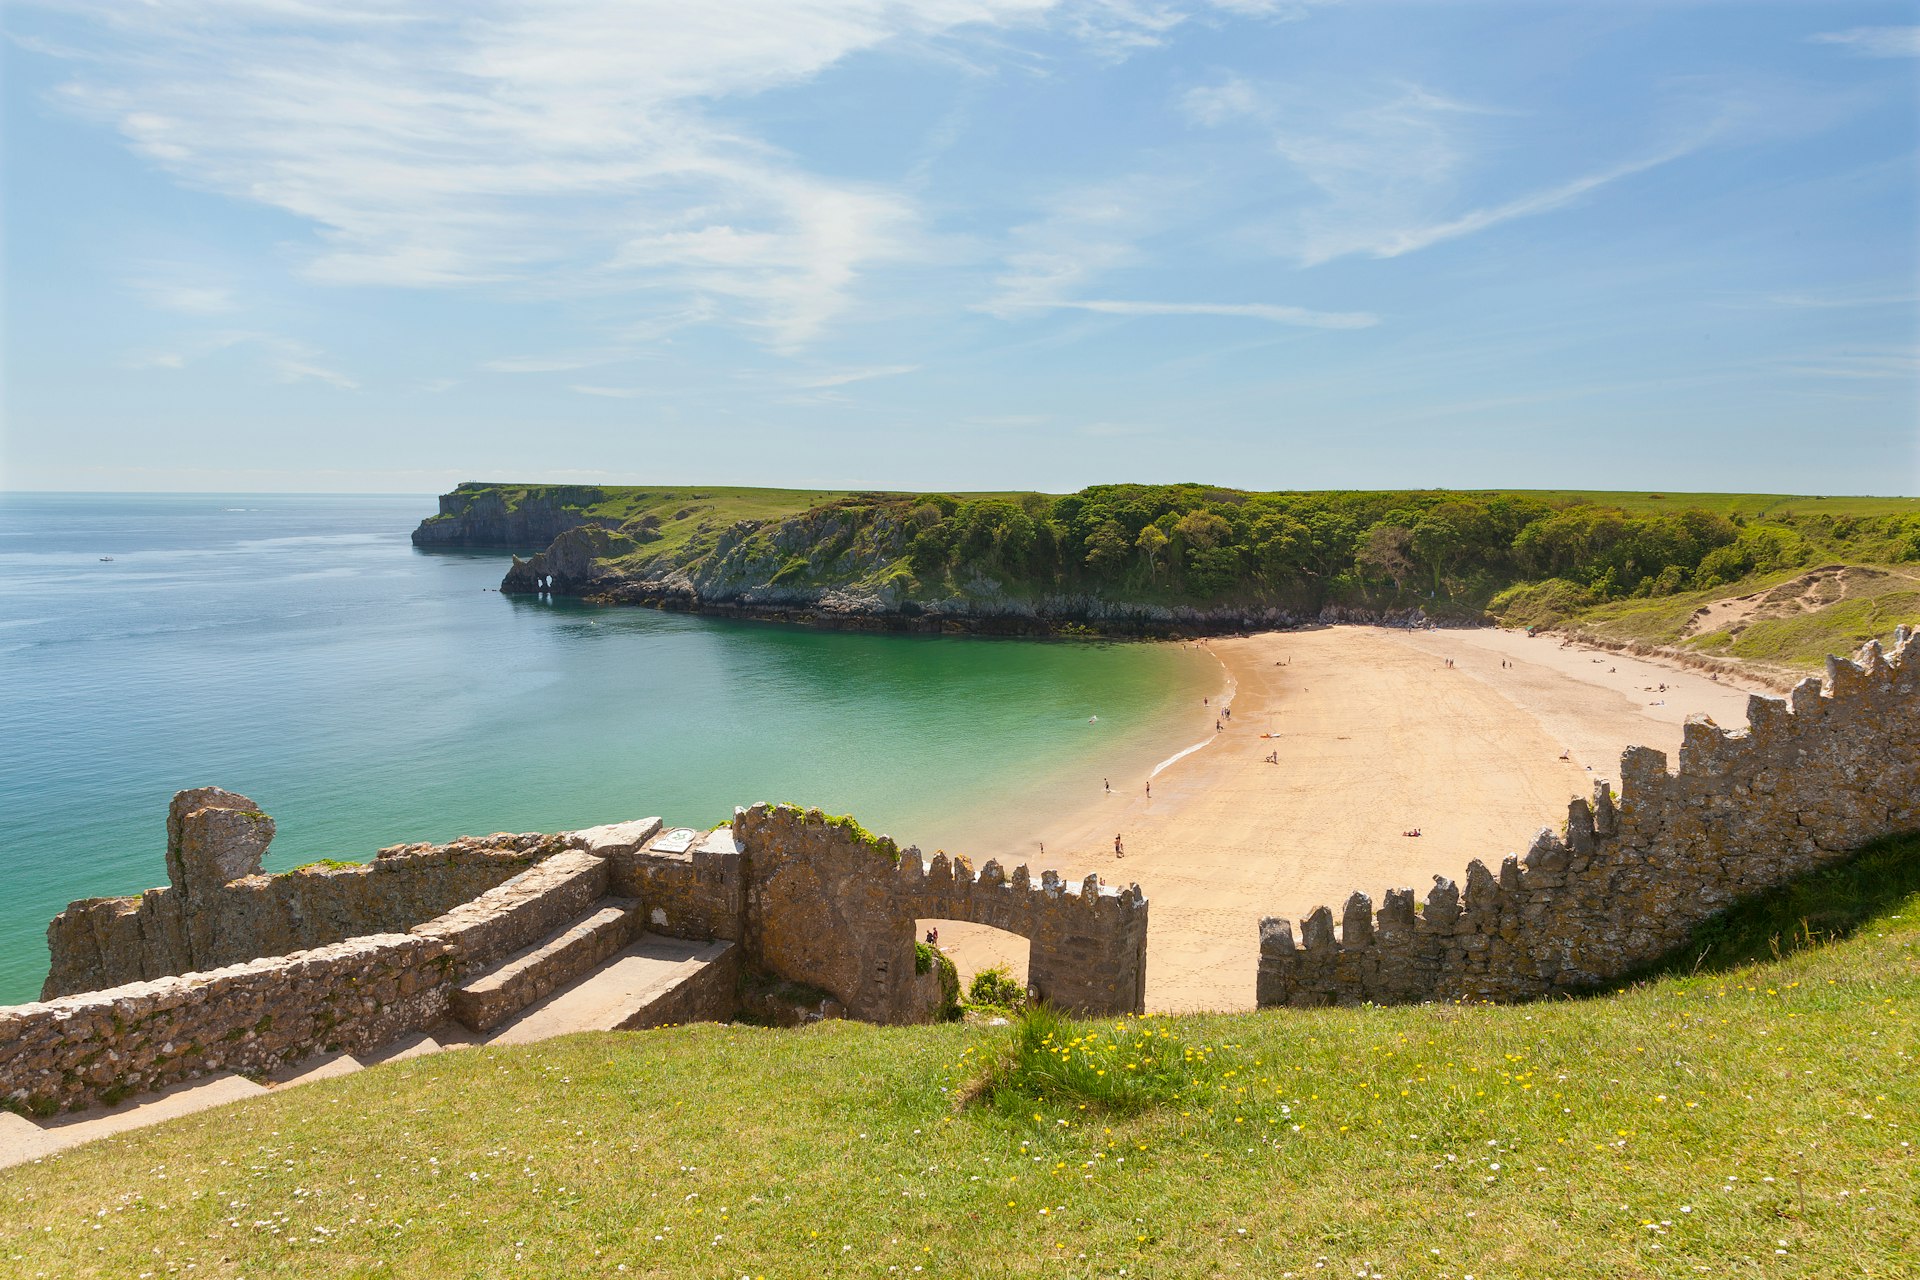 A view of Barafundle Bay